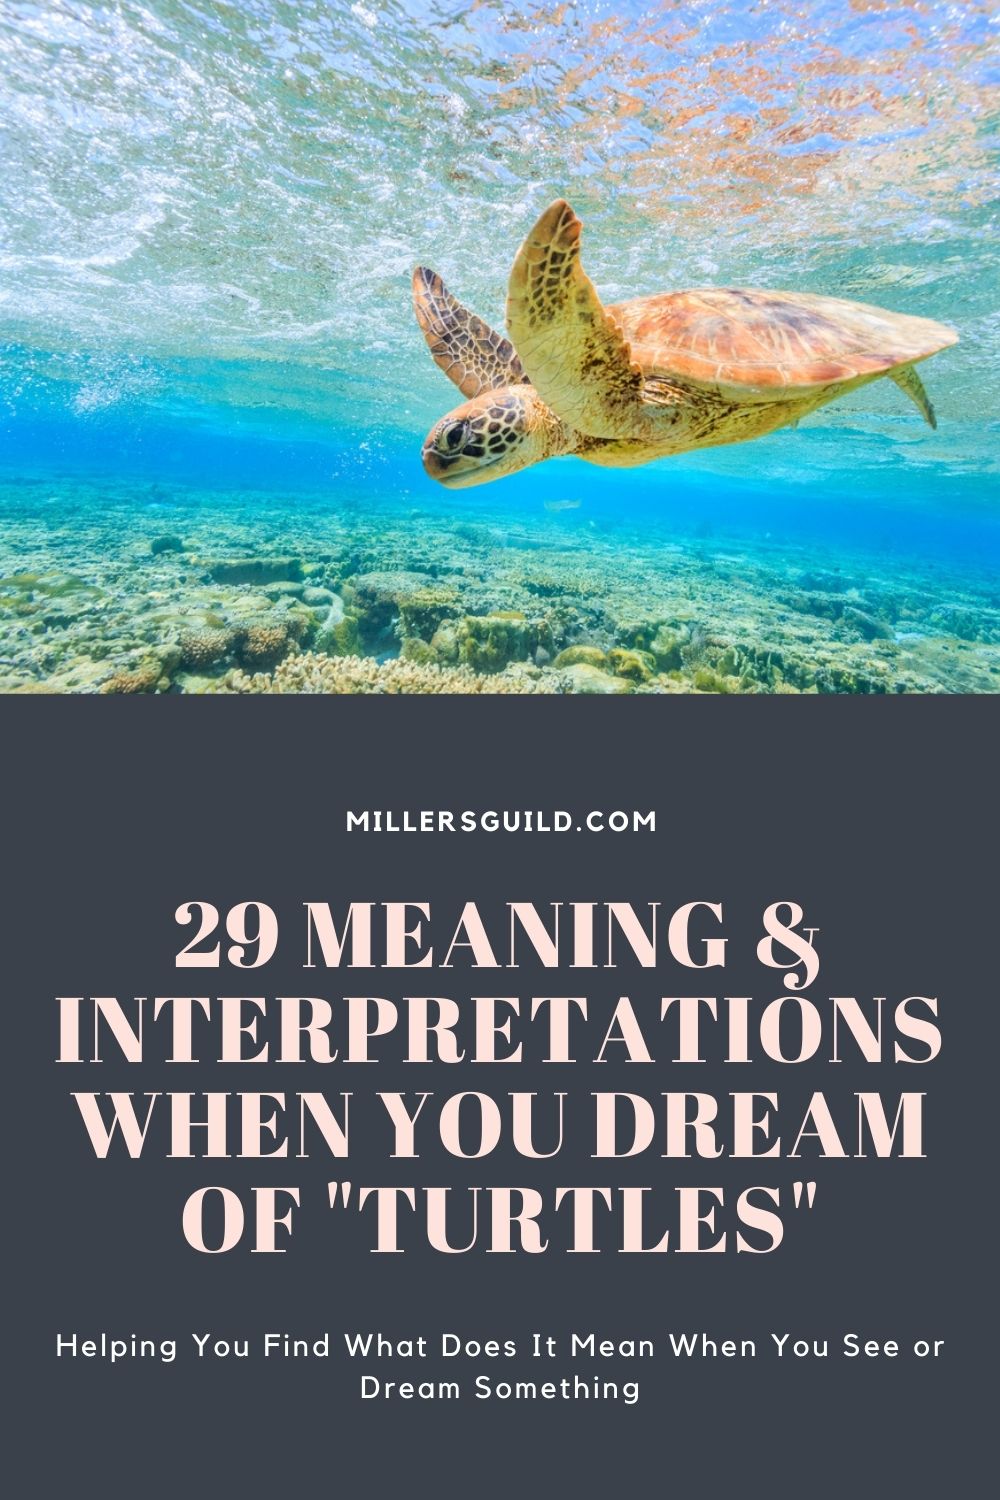 29 Meaning & Interpretations When You Dream of Turtles 3